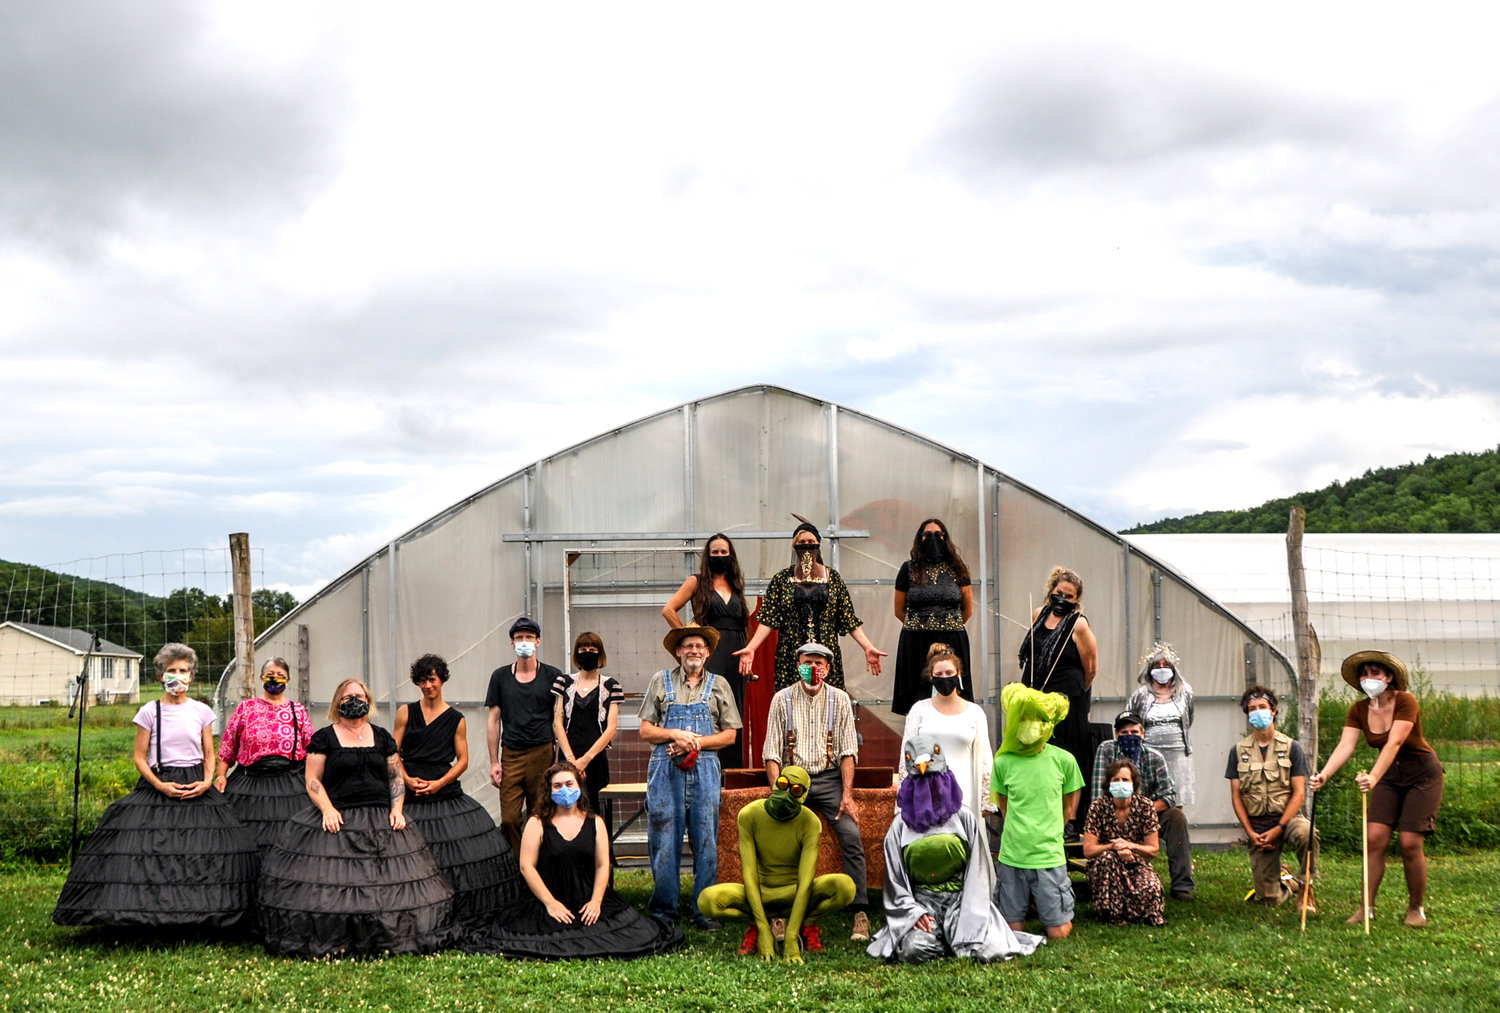 Fifteen musicians, actors, stilt walkers, writers, ecologists, farmers and Chief Gentlemoon of the Lenape-Nation of PA are involved with the creation of Farm Arts Collective’s ““Dream on the Farm”” in Damascus, PA.